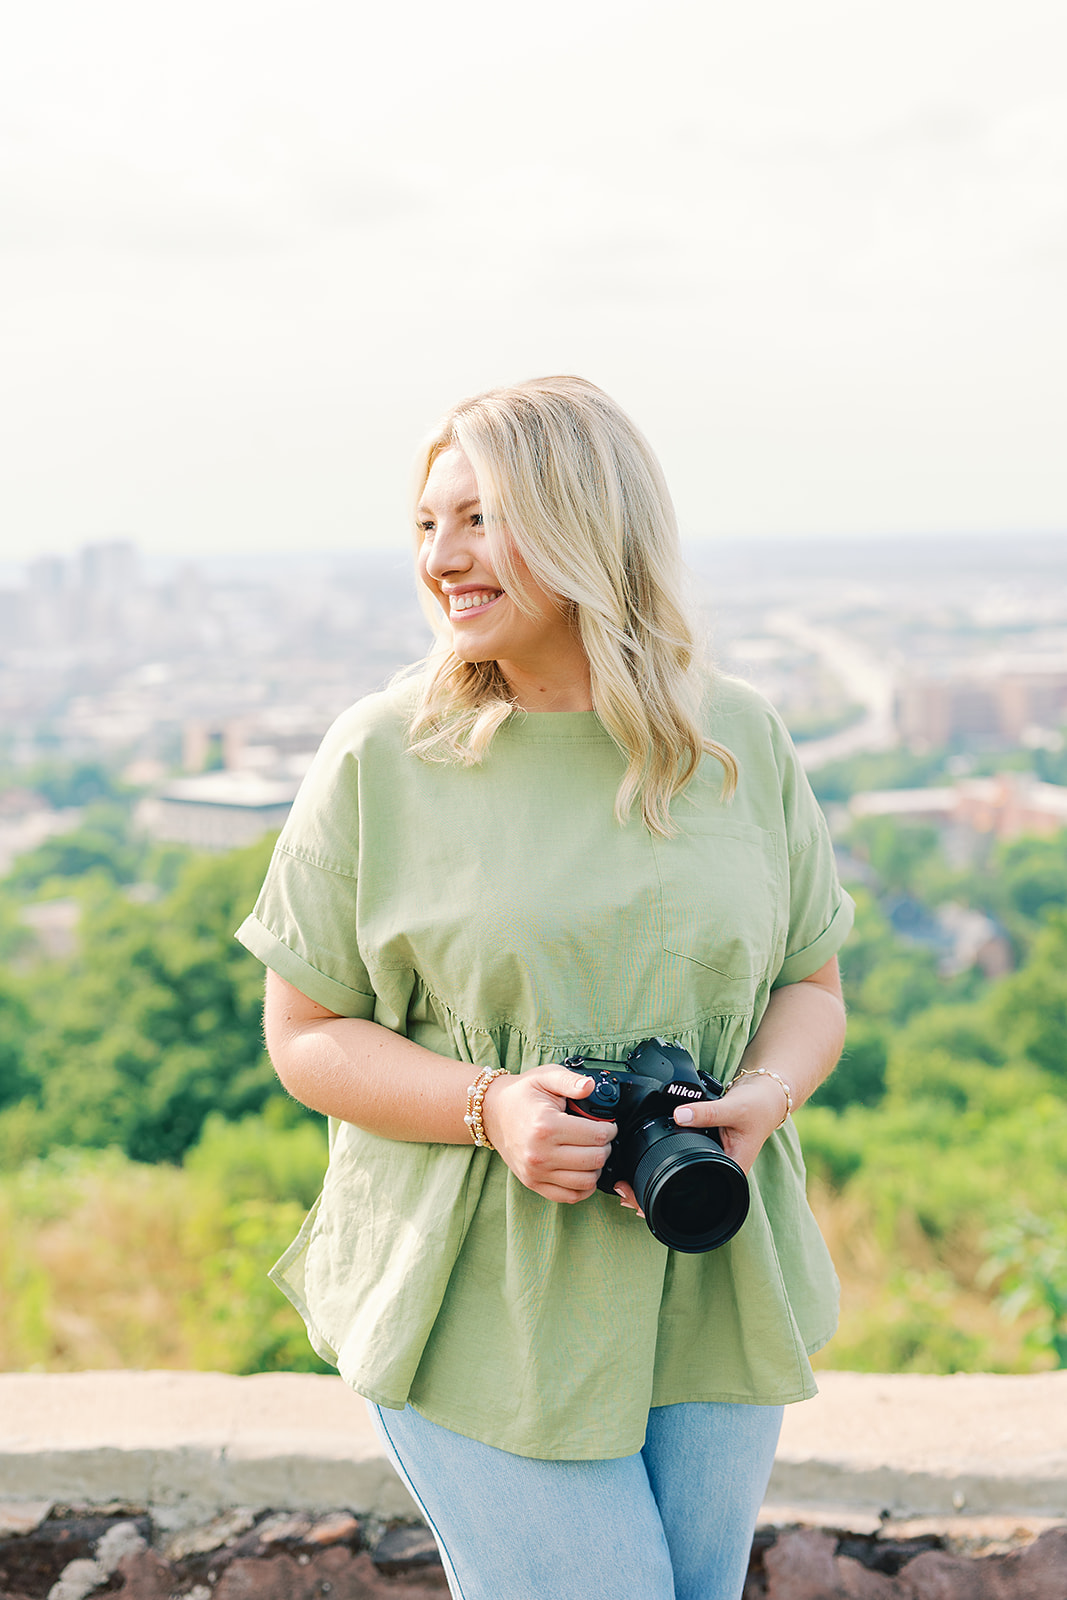 A branding and headshot session for a photographer in Birmingham Alabama by Abby Bates Photography